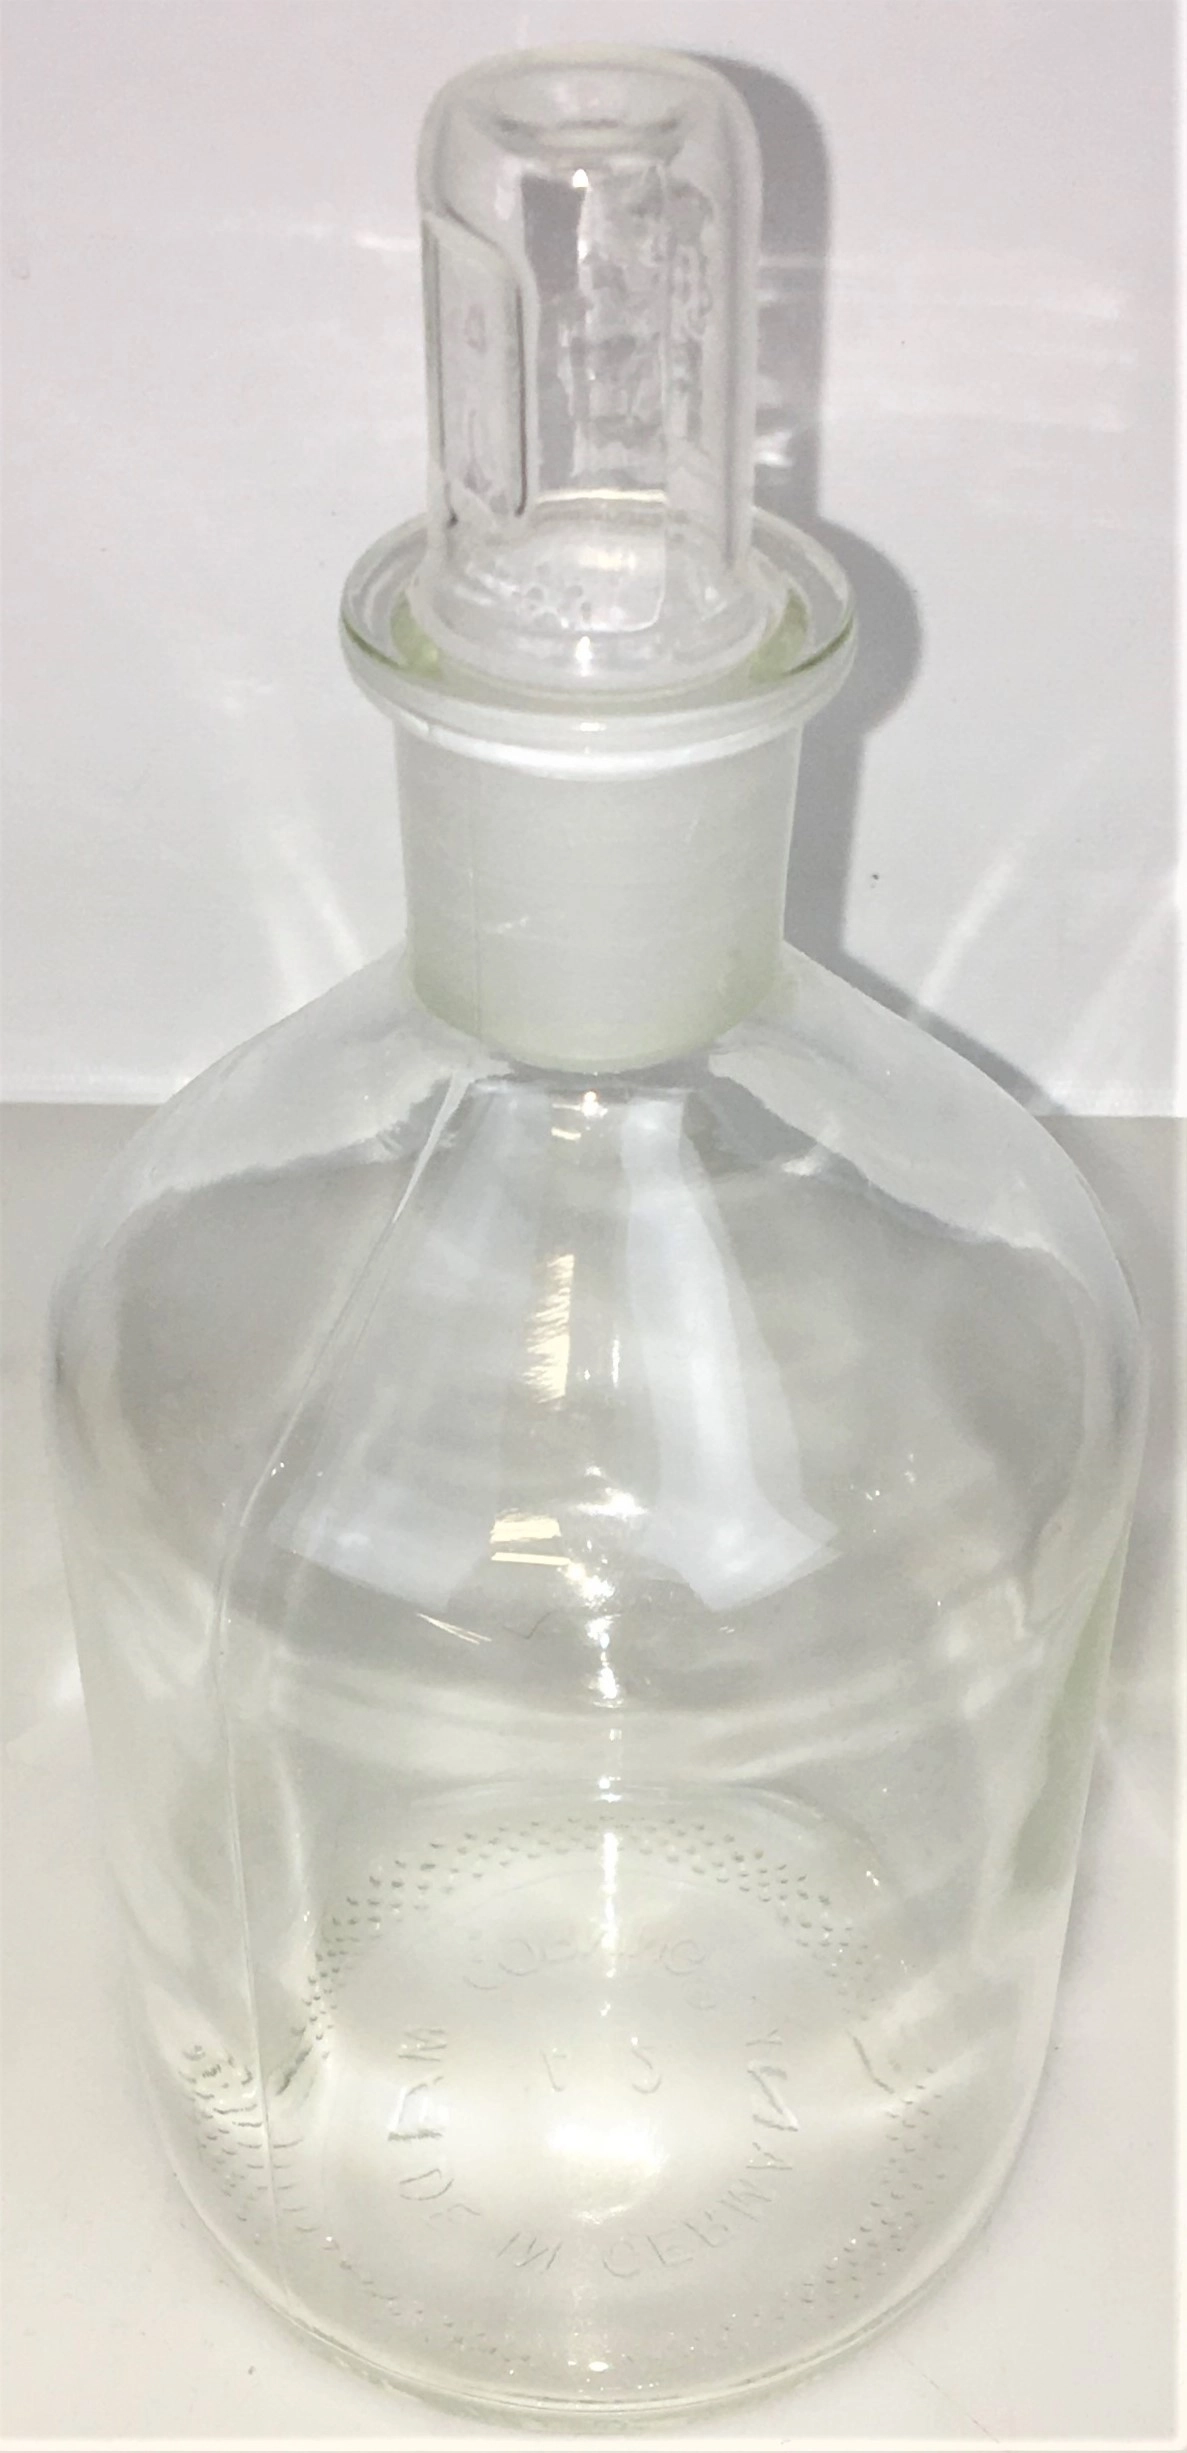 Corning PYREX 1500-500 Reagent Storage Bottle with Stopper - 500mL